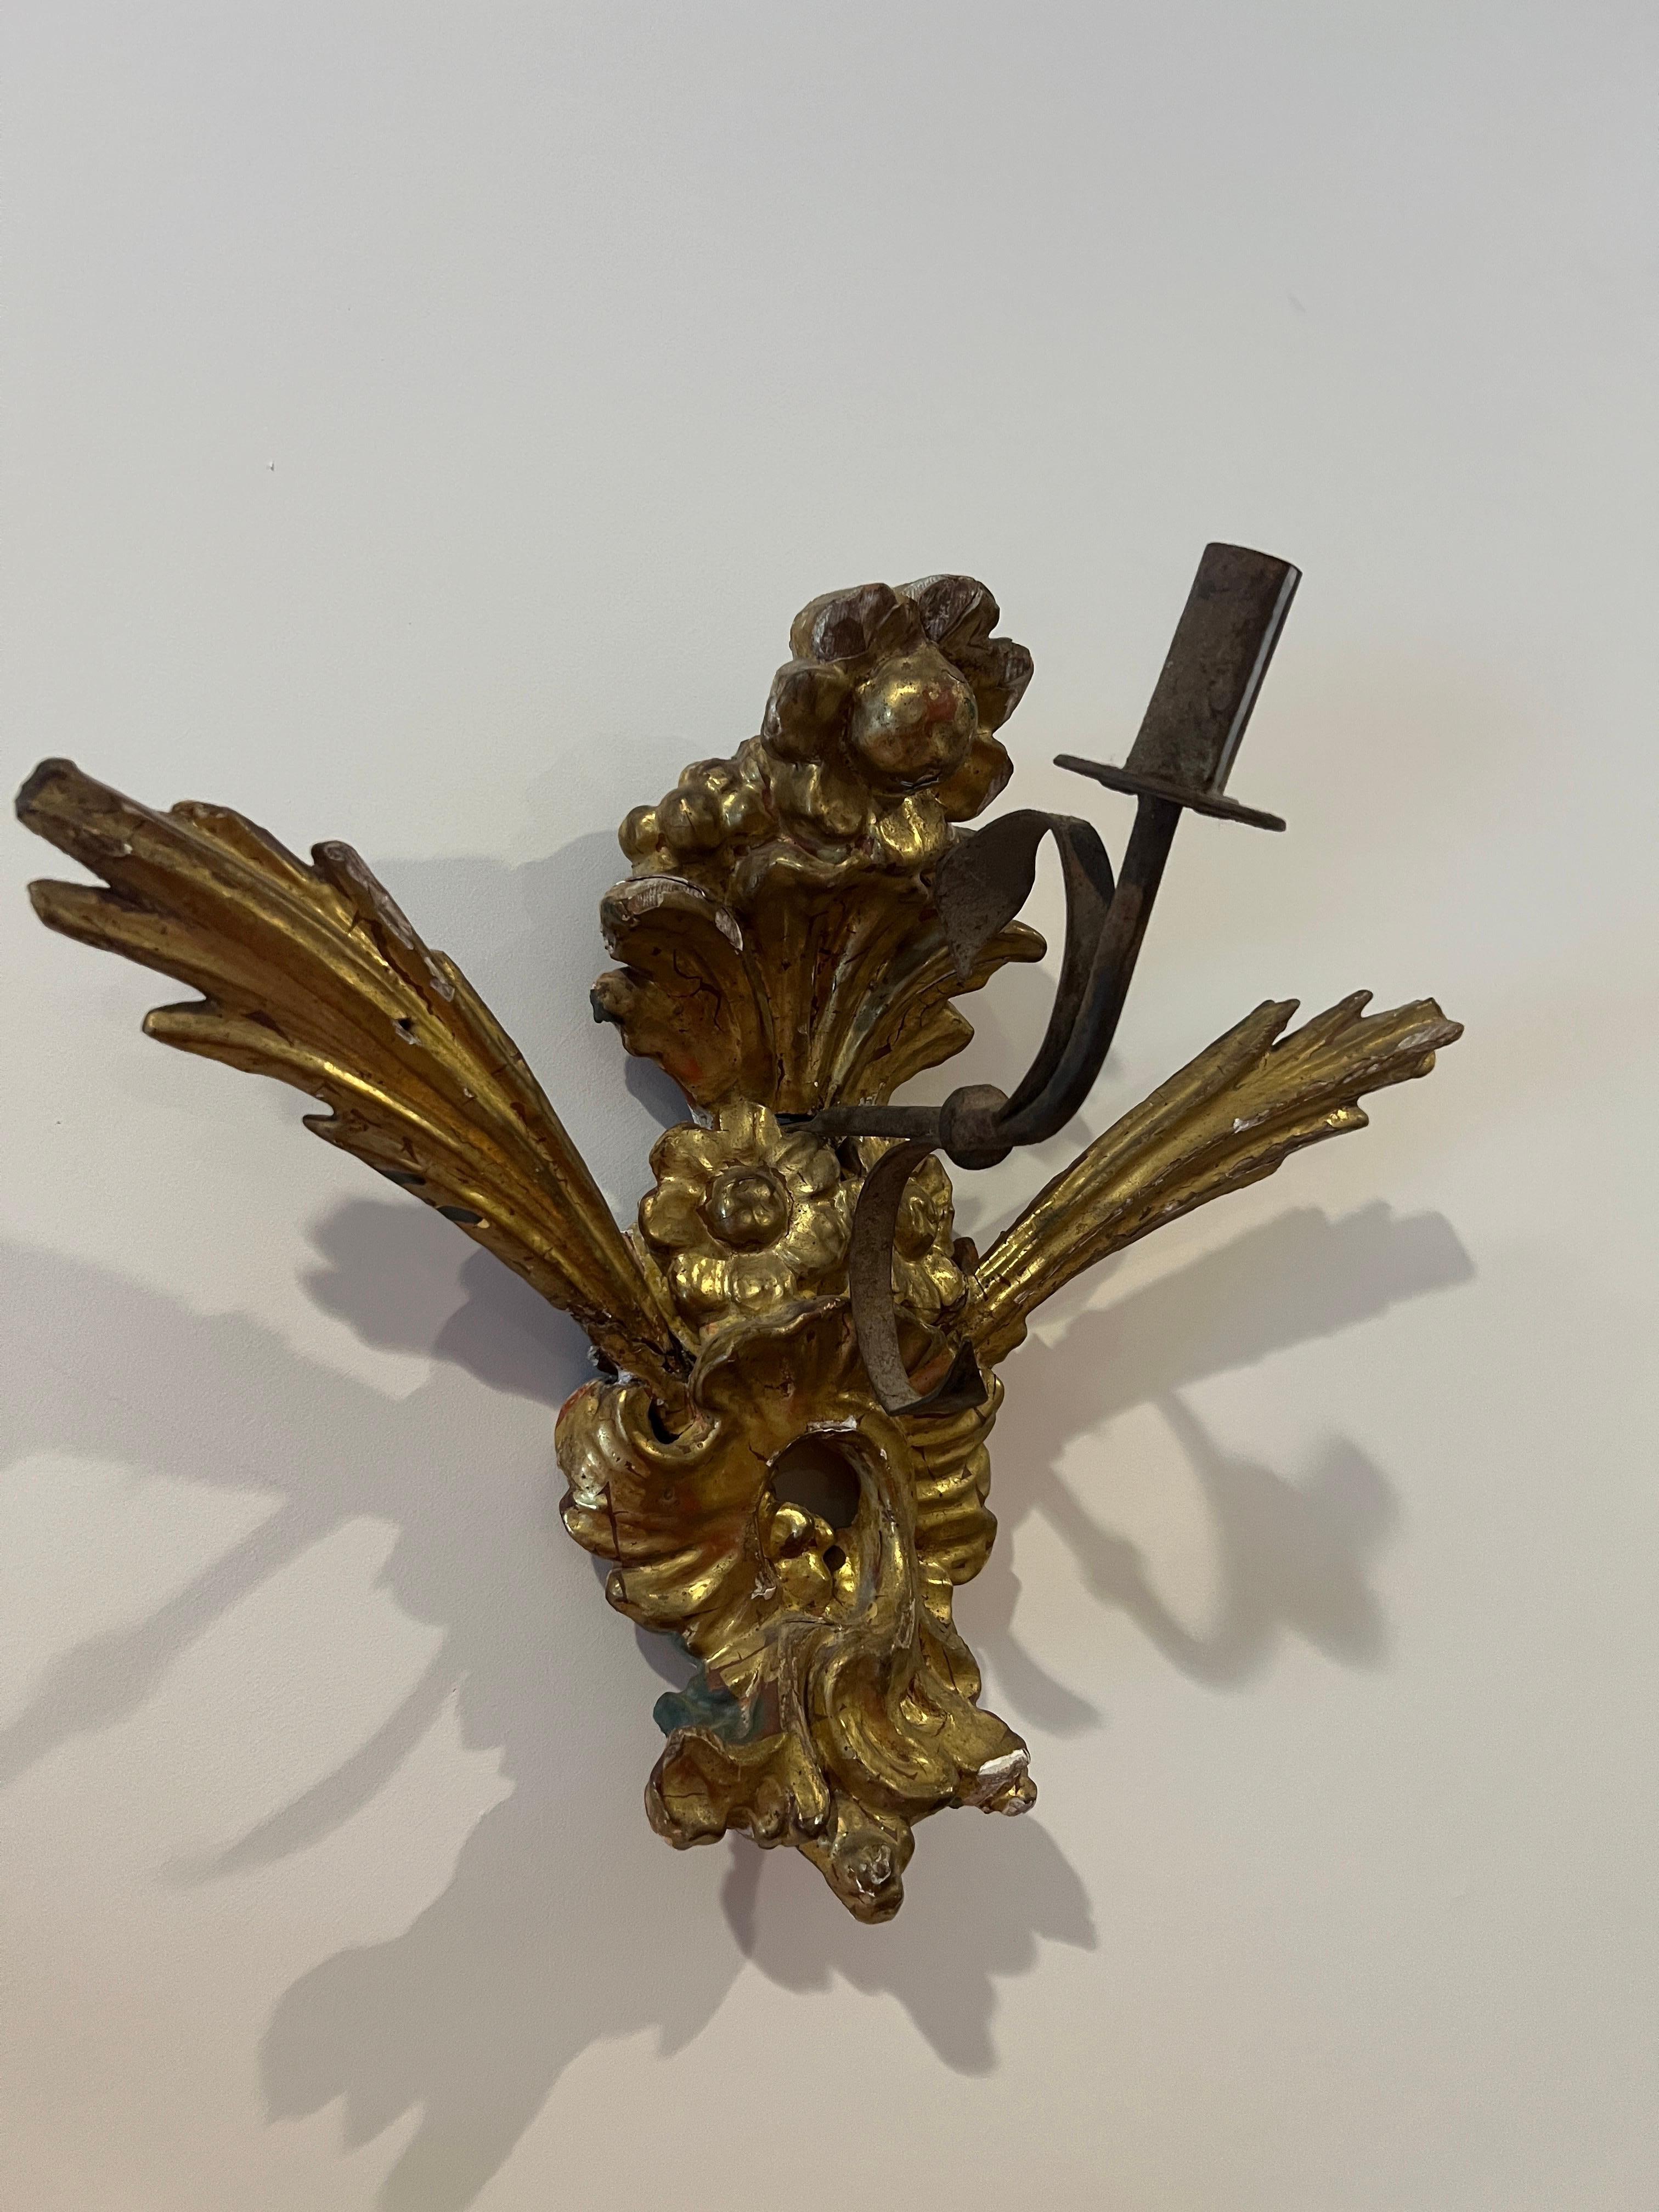 Italian, 18th century.

A good quality antique carved and water gilded single arm sconce. Featuring a Rococo and Renaissance Revival style - the sconce has a single hand forged wrought iron arm for a single candle. Likely from a church or religious